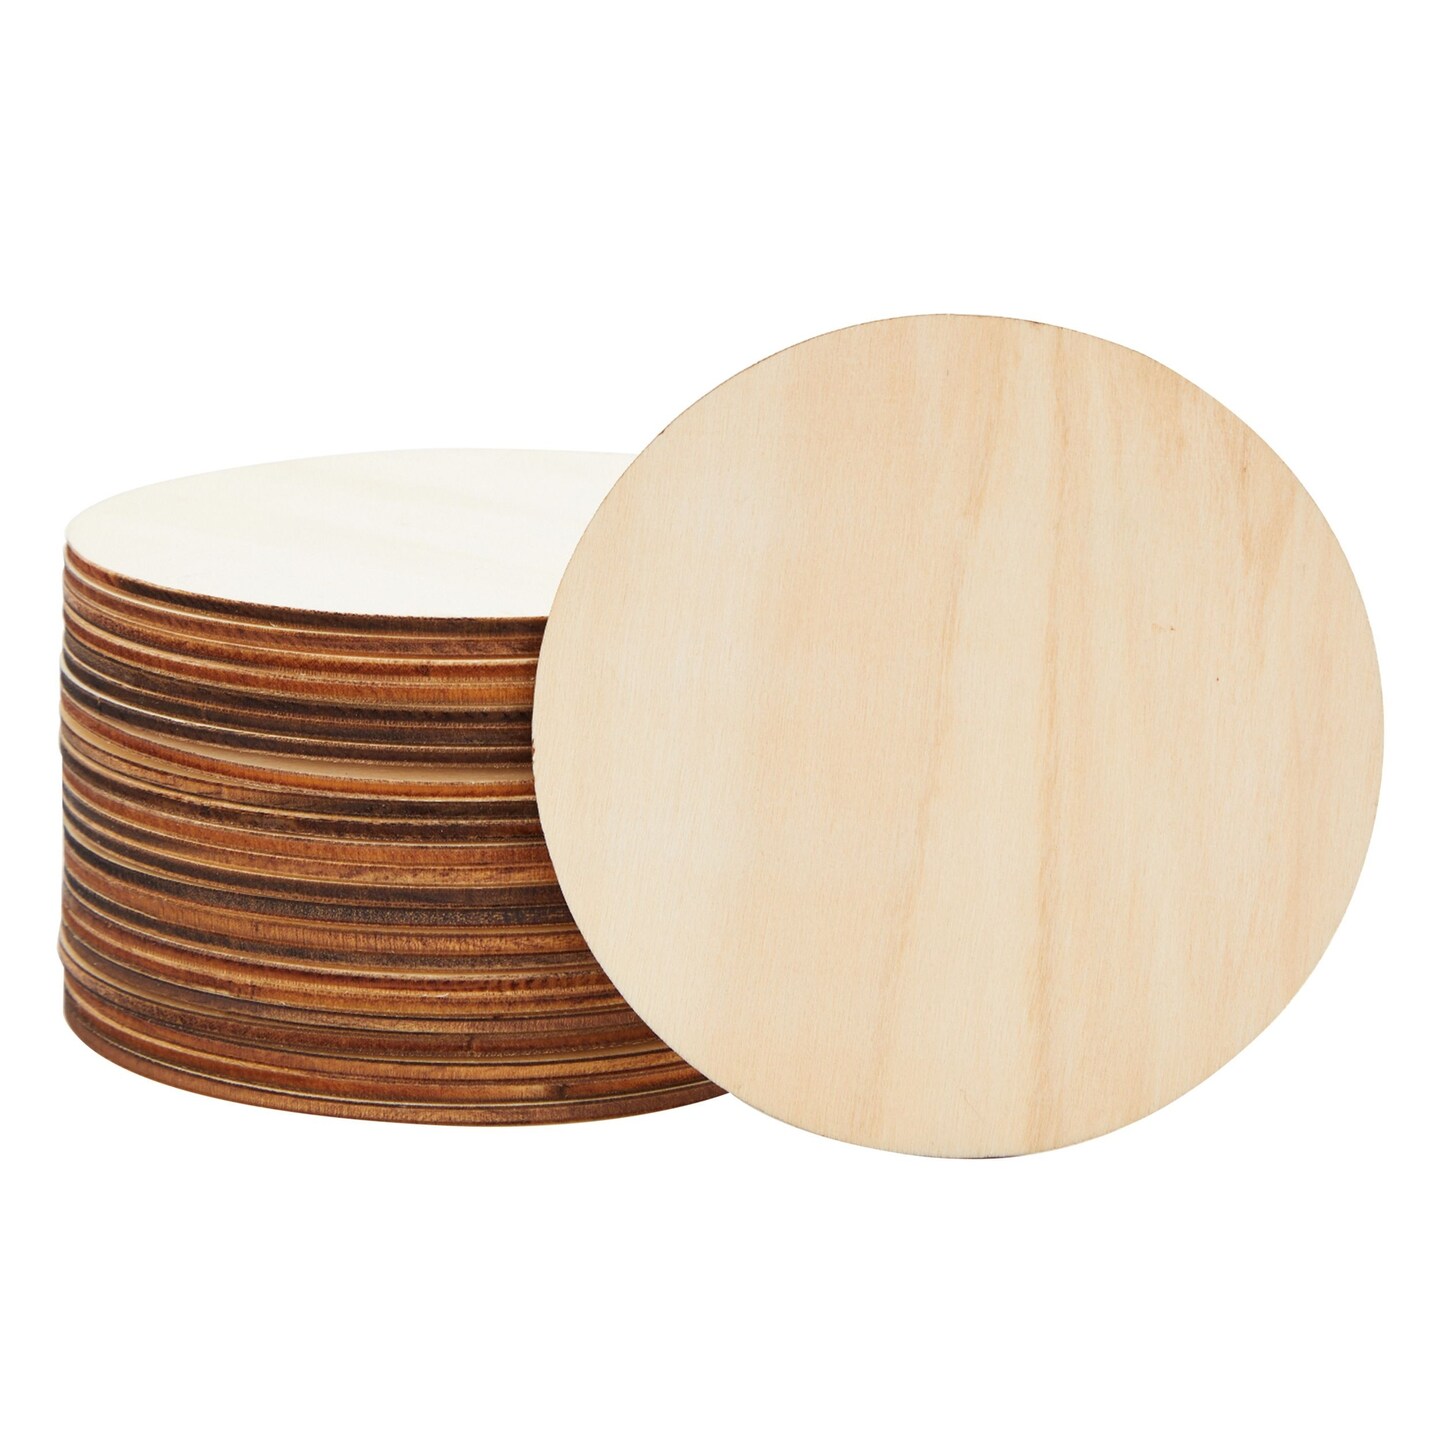  Wood Shapes - Wooden Discs Craft Wood Pieces